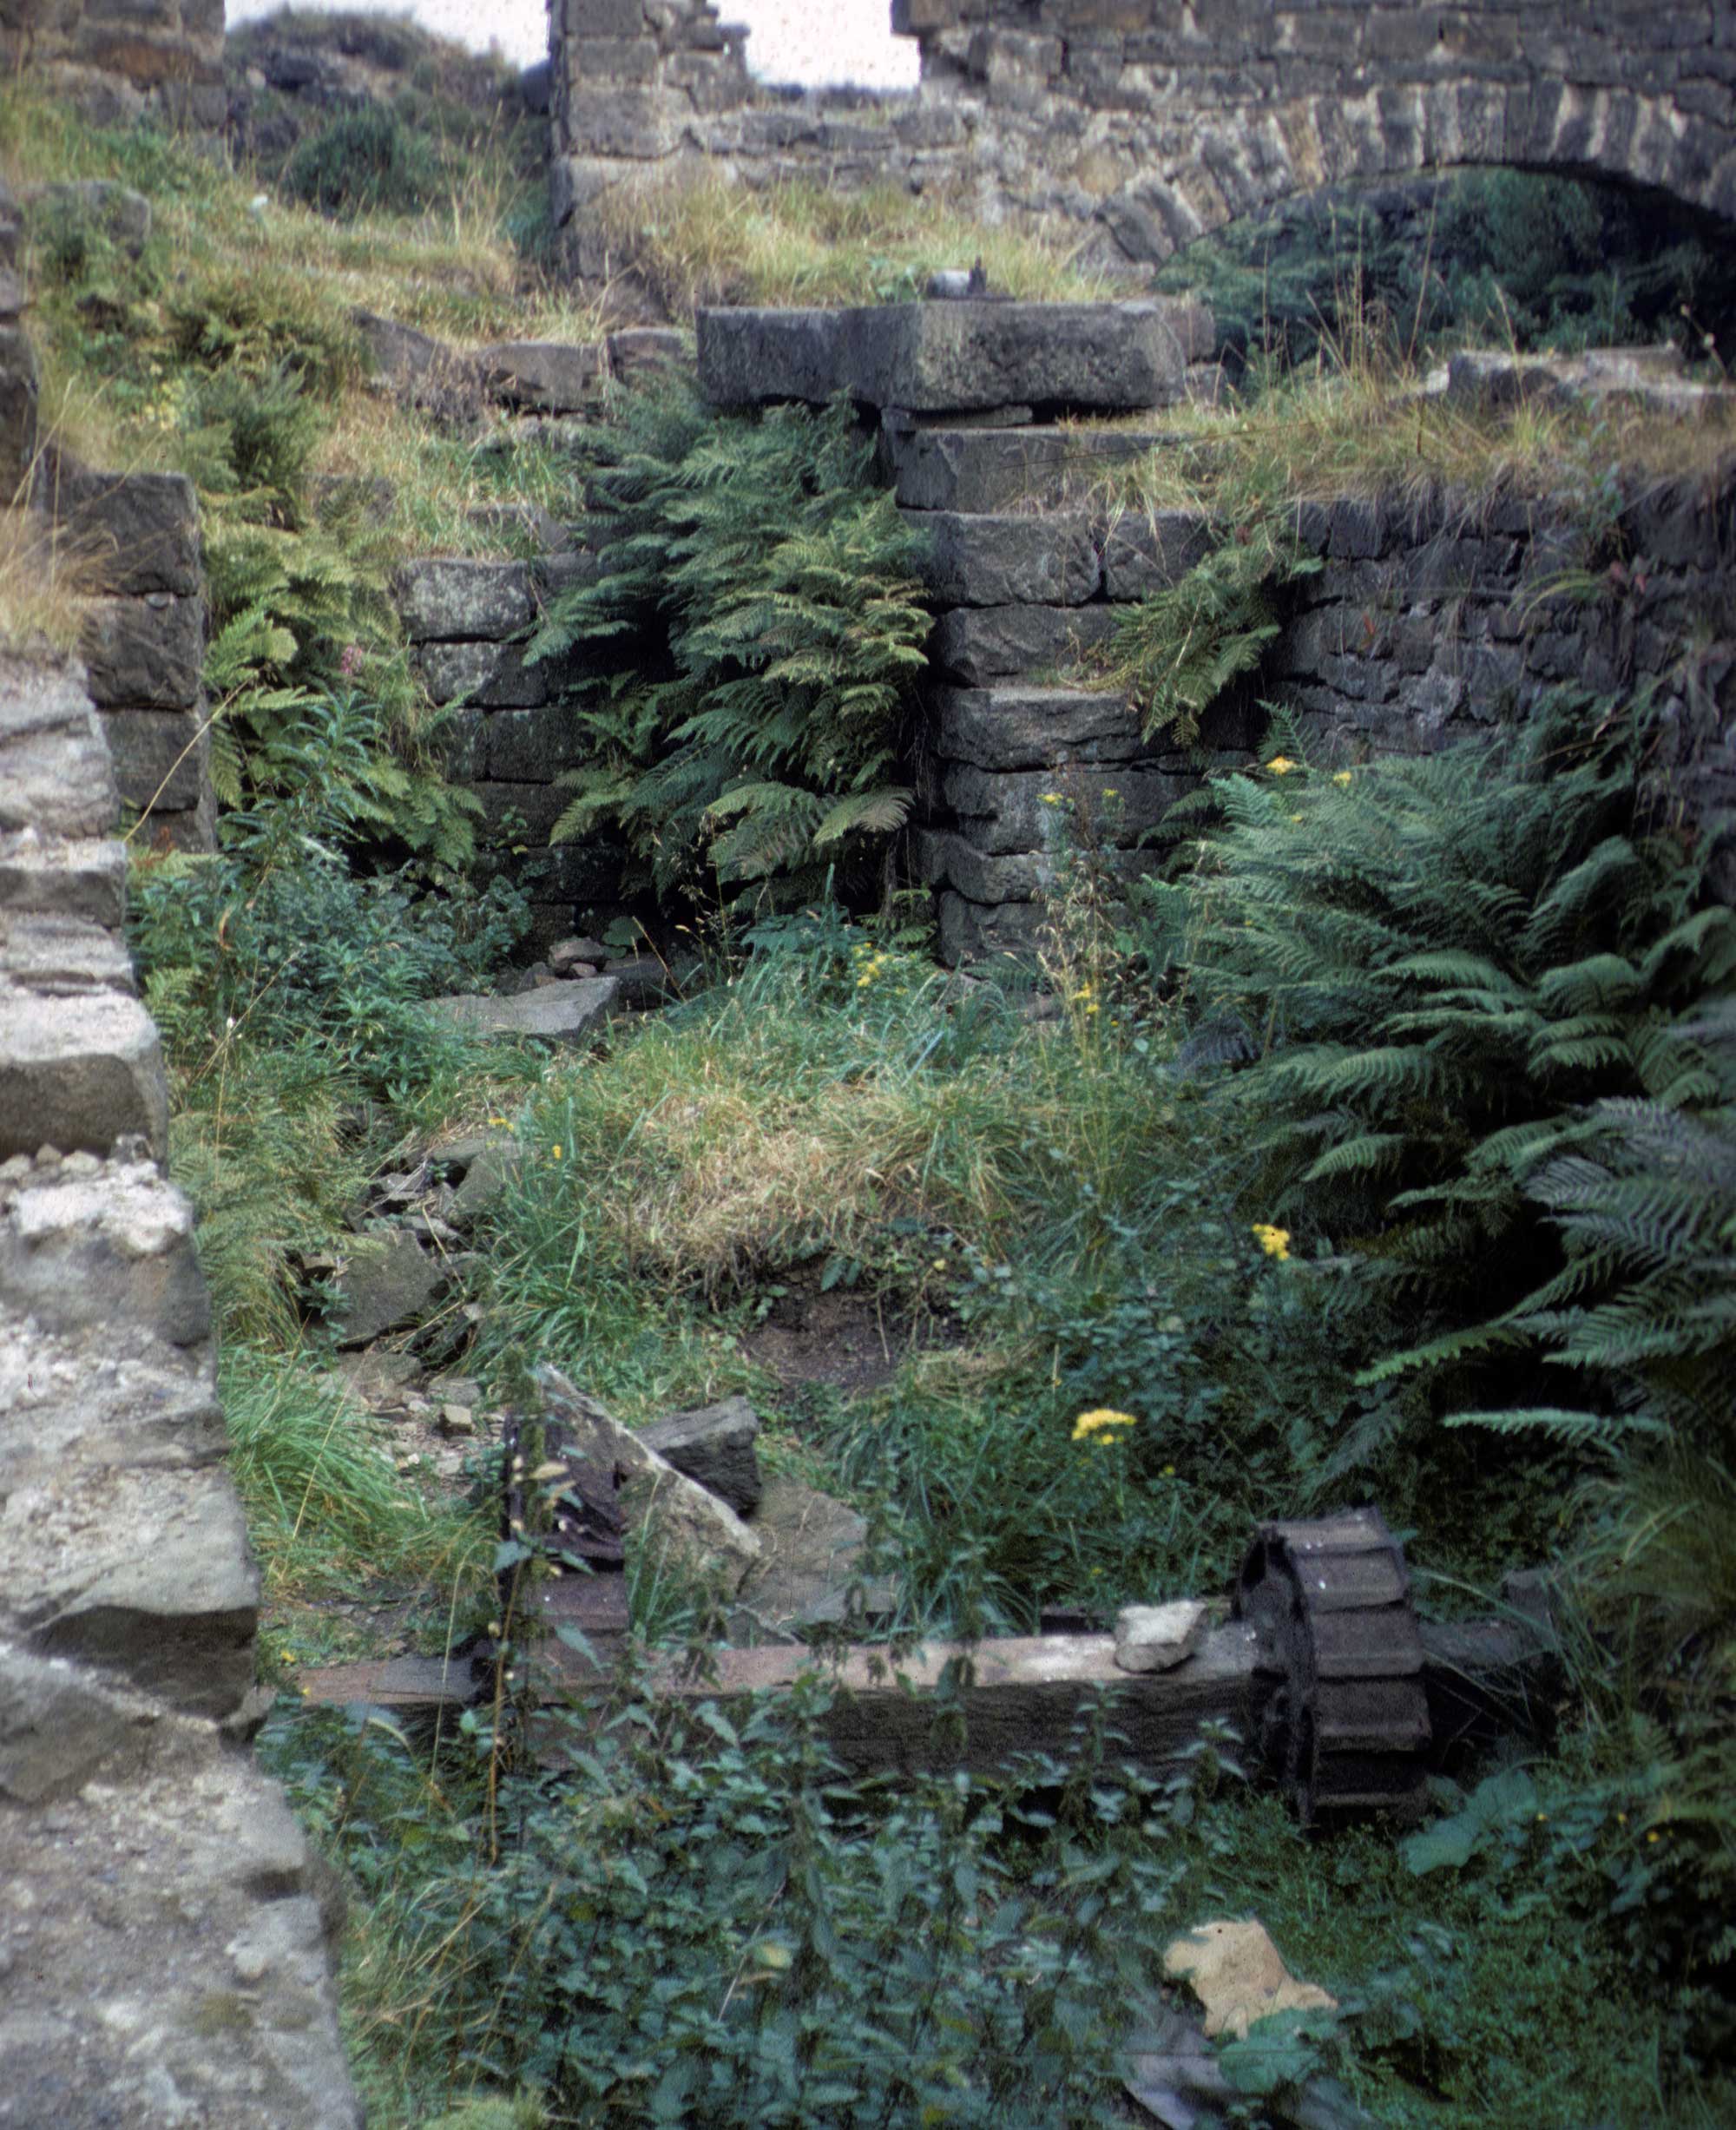 Remains of a wheelpit covered with vegetation